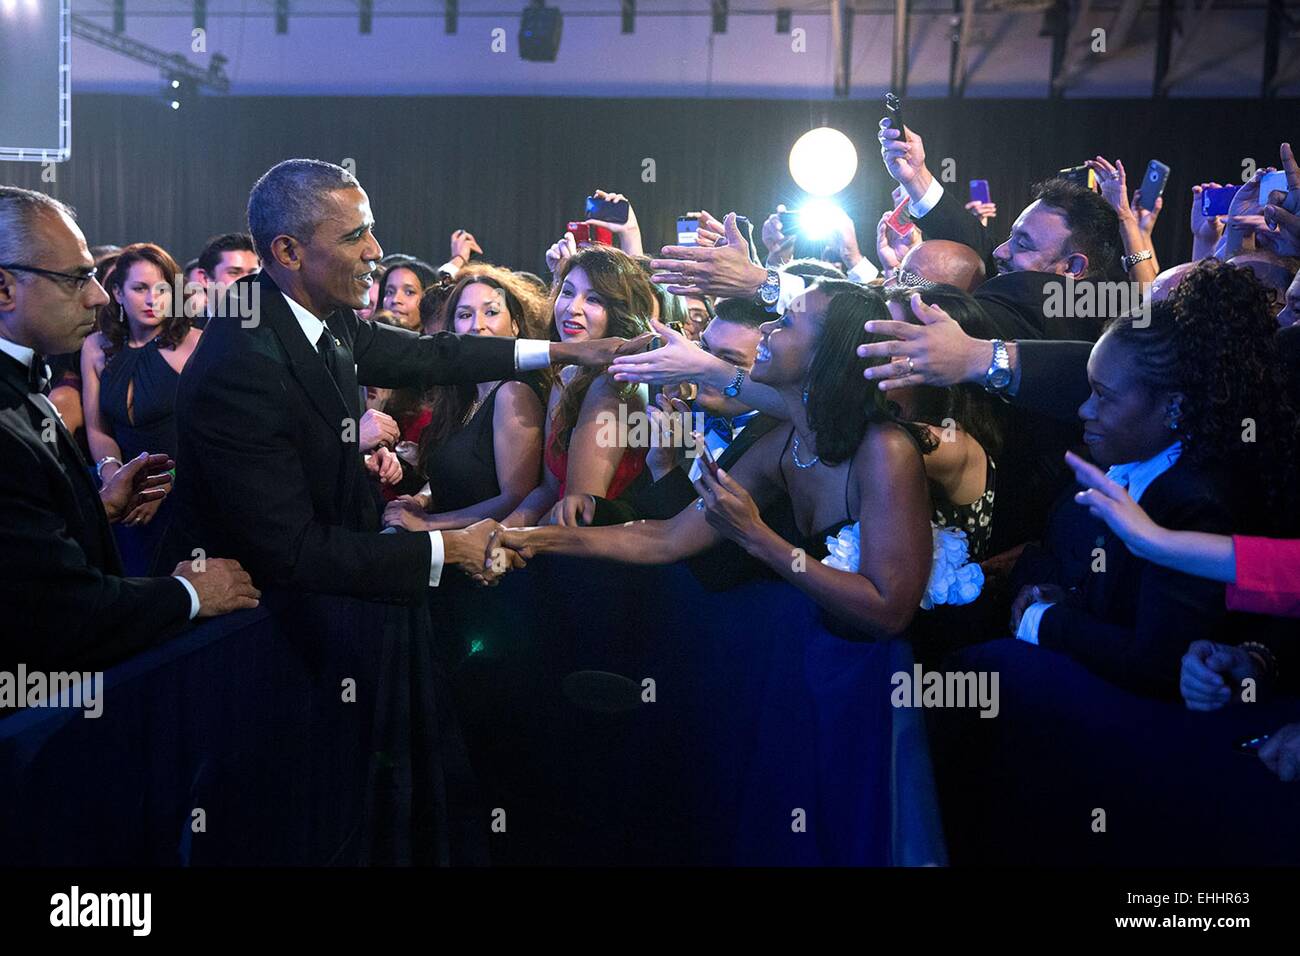 US President Barack Obama greets audience members at the Congressional Hispanic Caucus Institute's 37th Annual Awards Gala dinner at the Walter E. Washington Convention Center October 2, 2014 in Washington, DC. Stock Photo